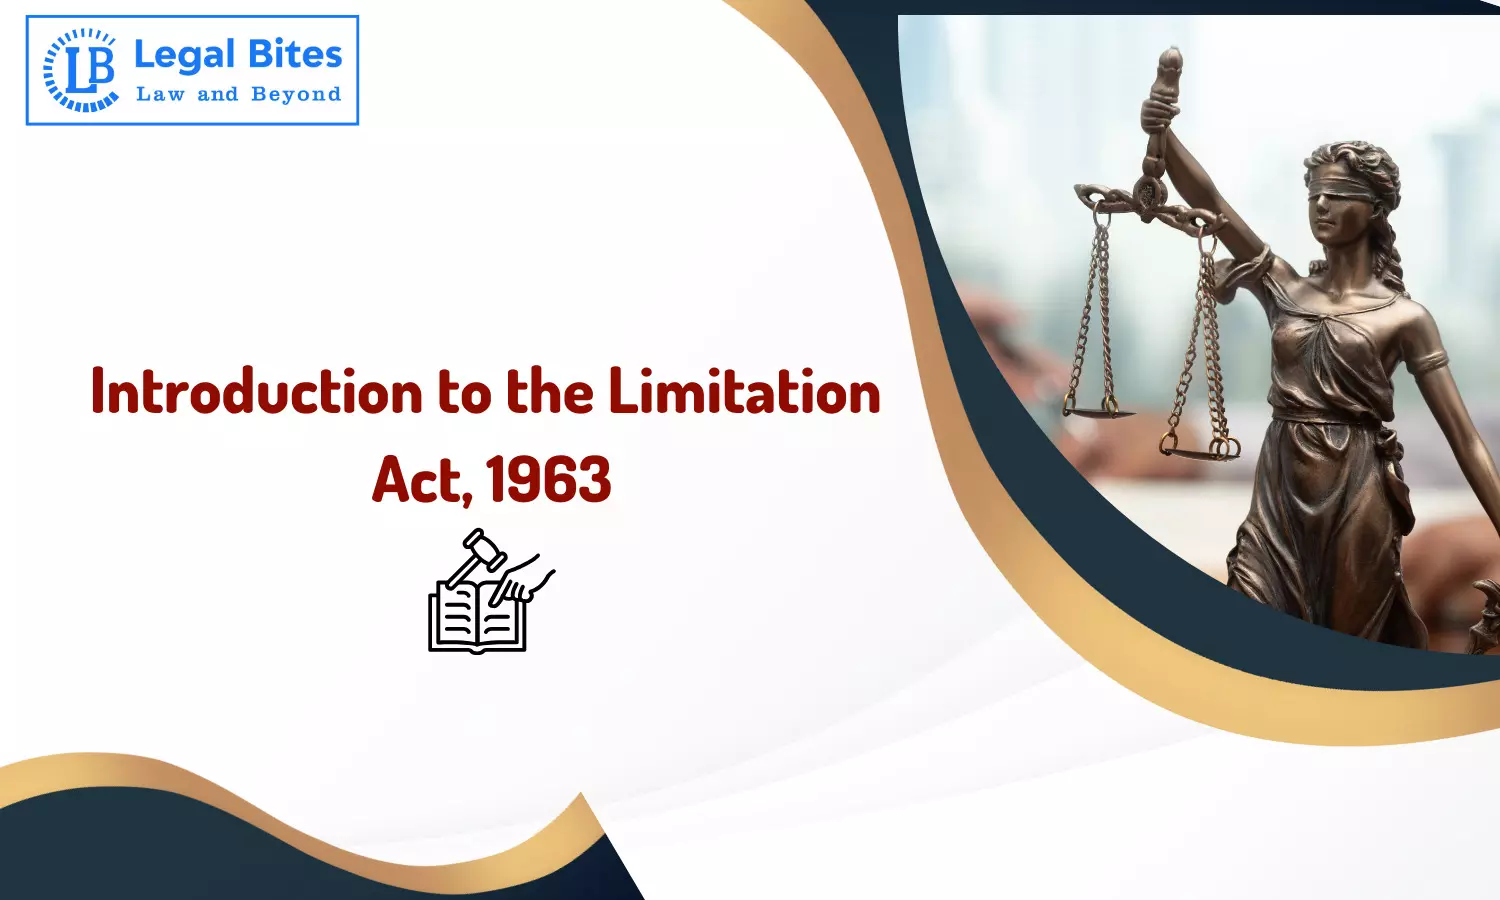 Introduction to the Limitation Act, 1963